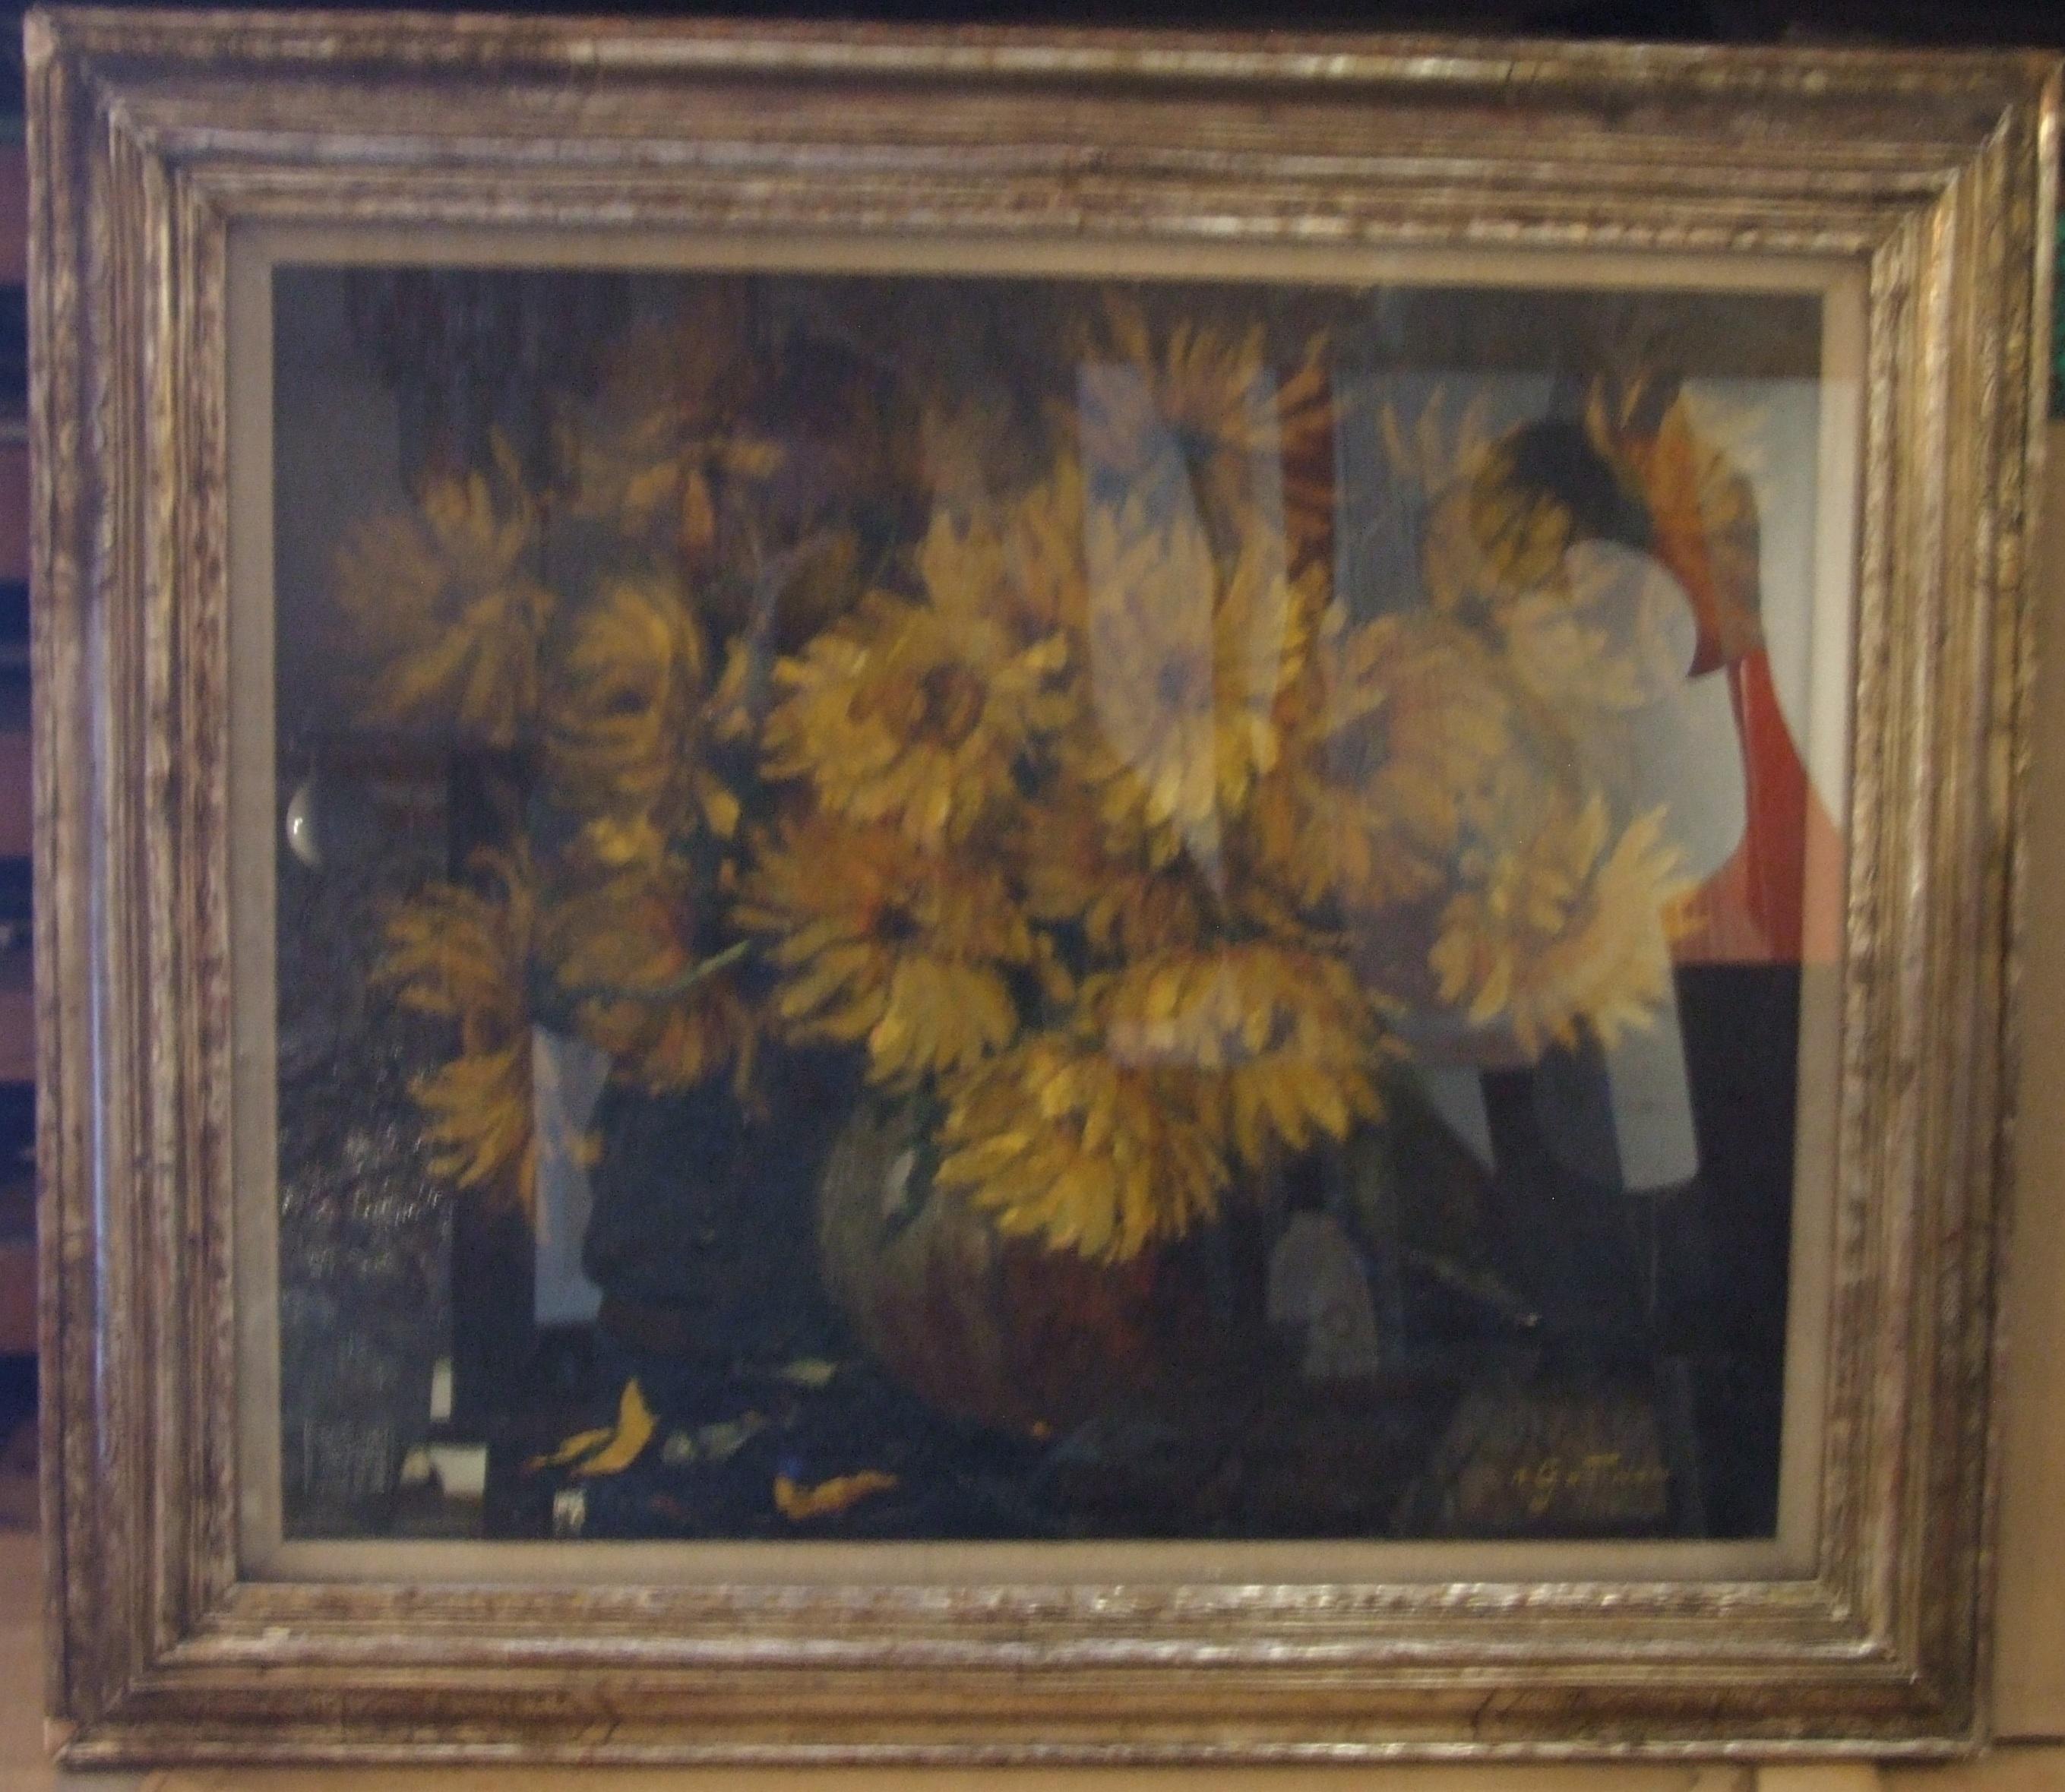 Aristide Goffinon is a belgian painter born in 1881 and dead in 1952. Painting comes with frame